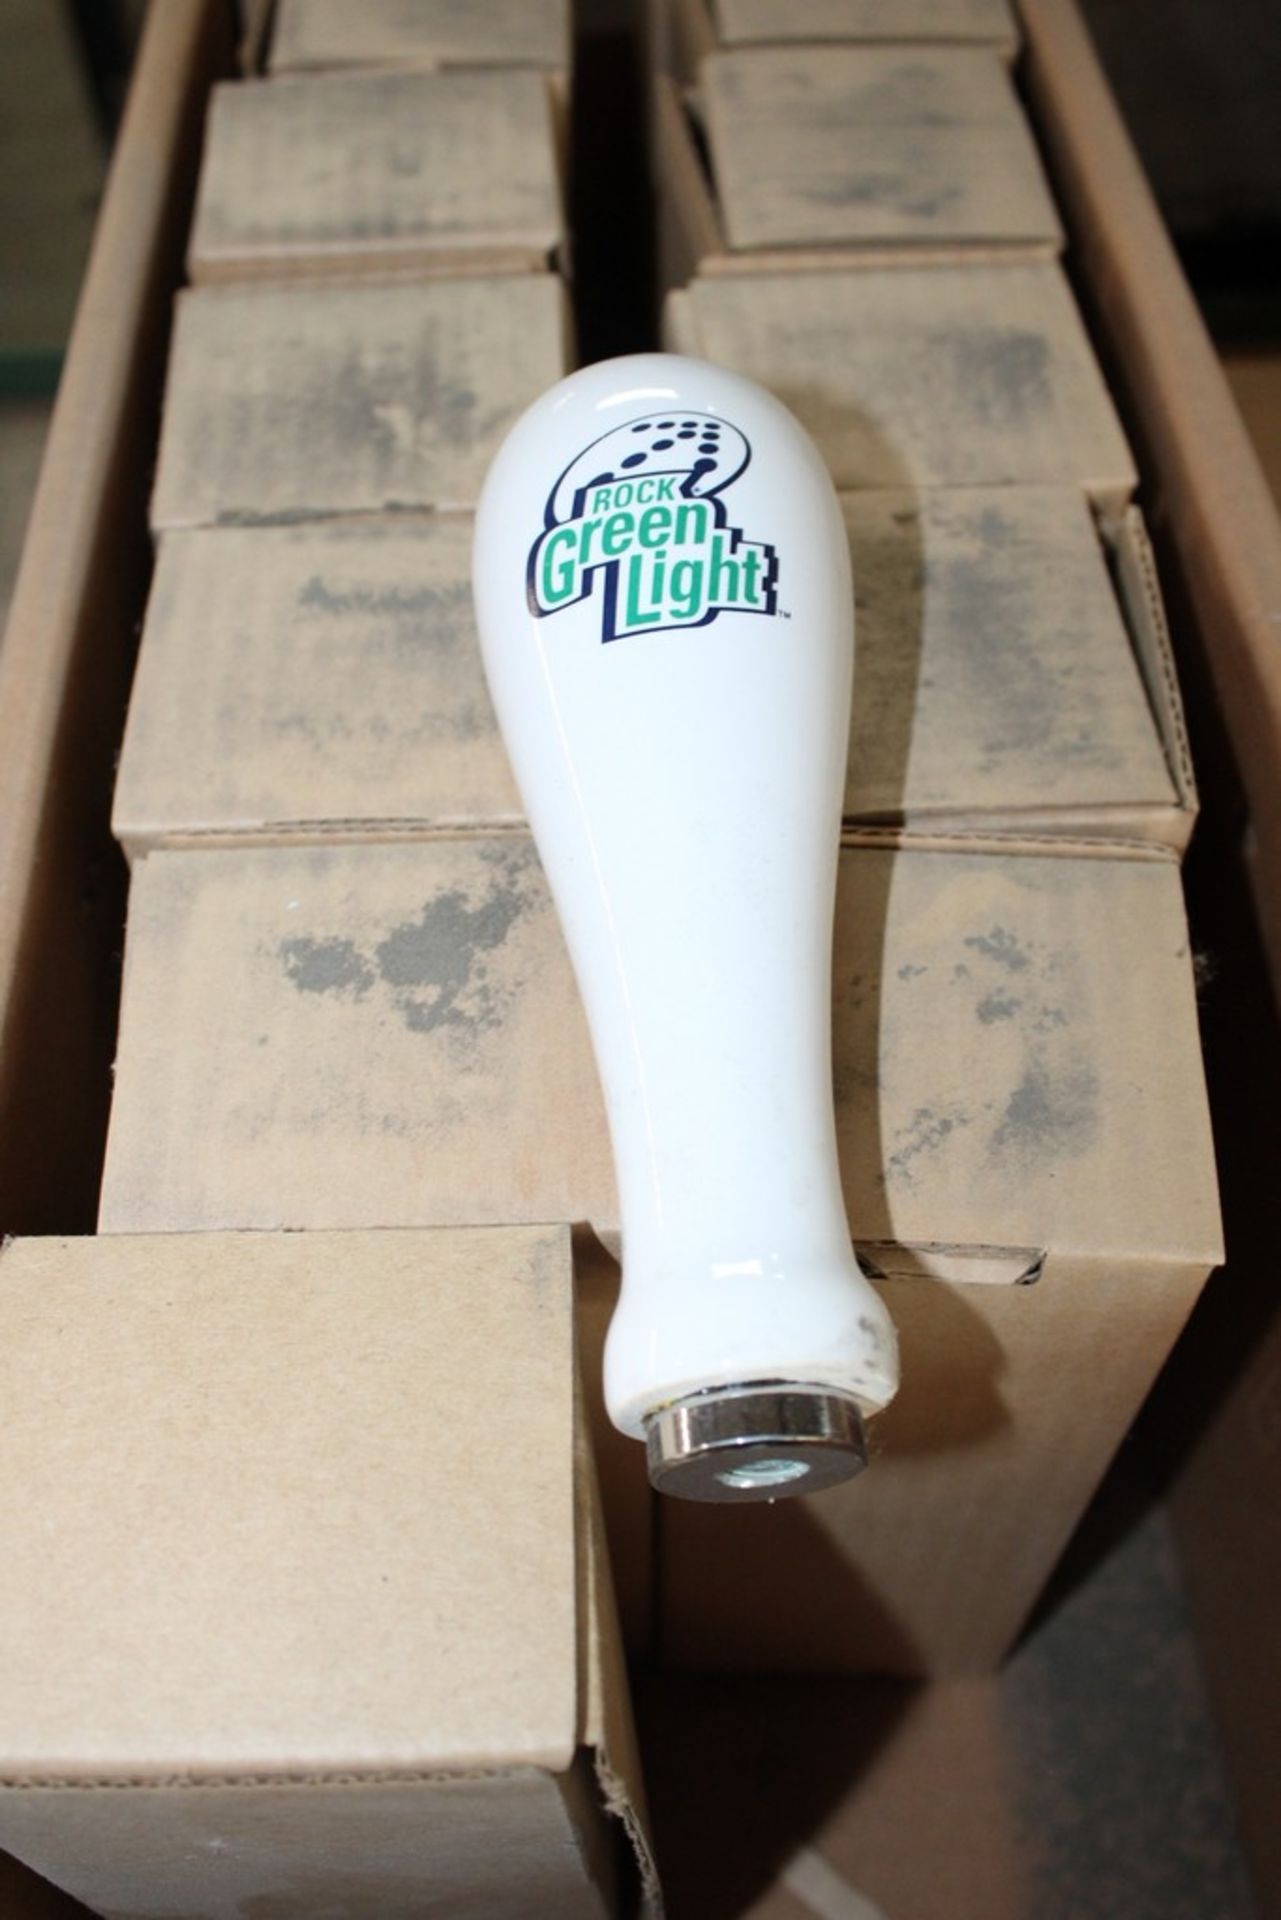 ROCK GREEN LIGHT TAP HANDLES IN BOX - Image 2 of 2